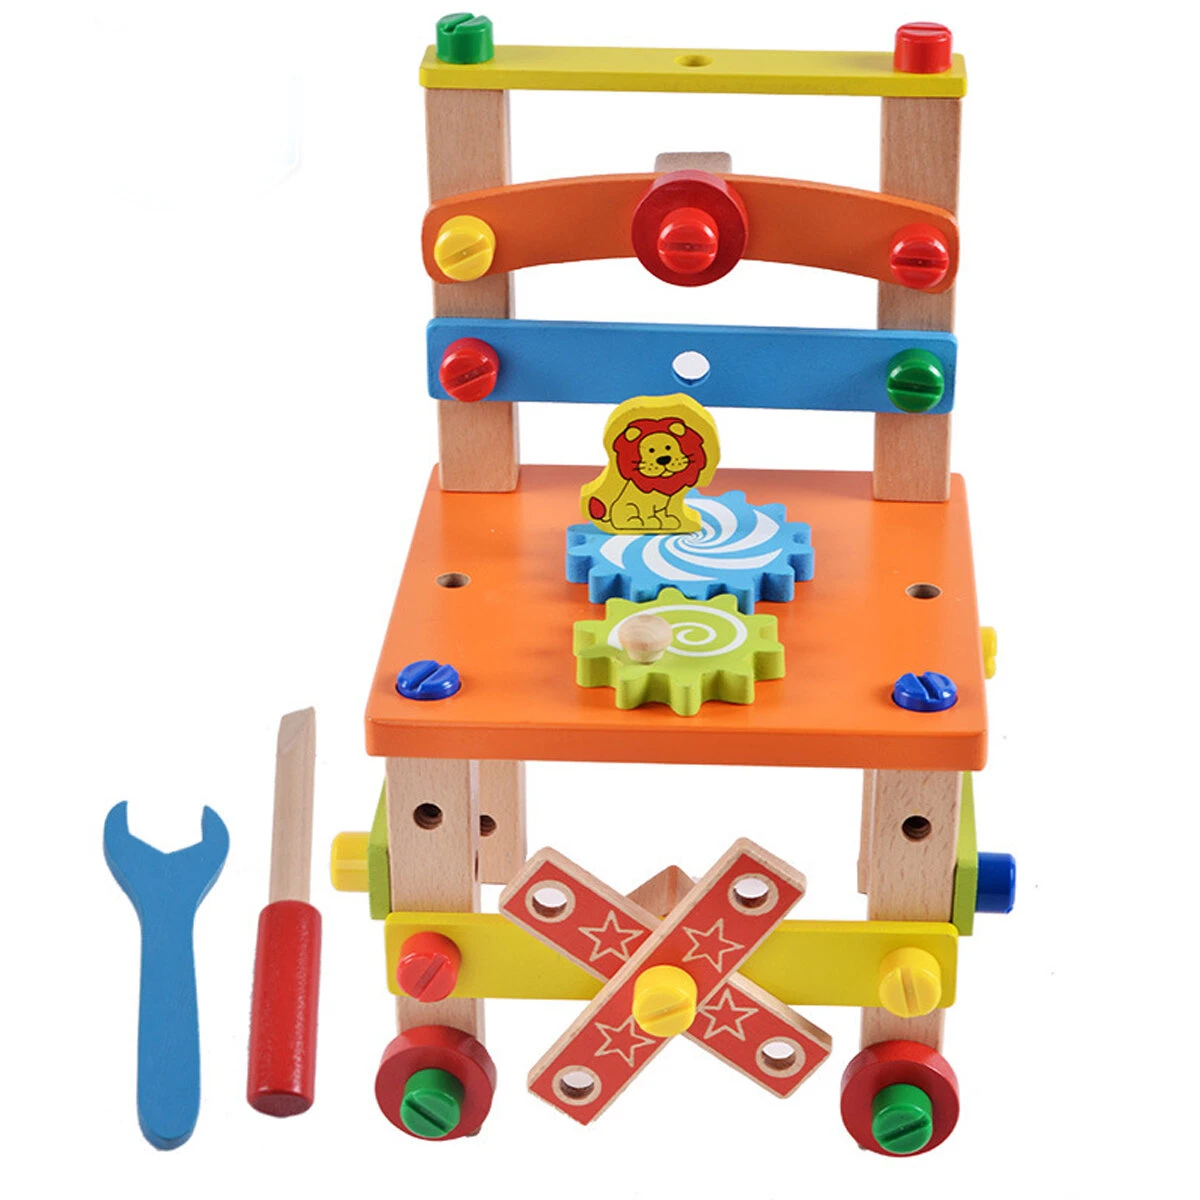 Diy creative toy multi-function nut disassembly combination toy wooden chair